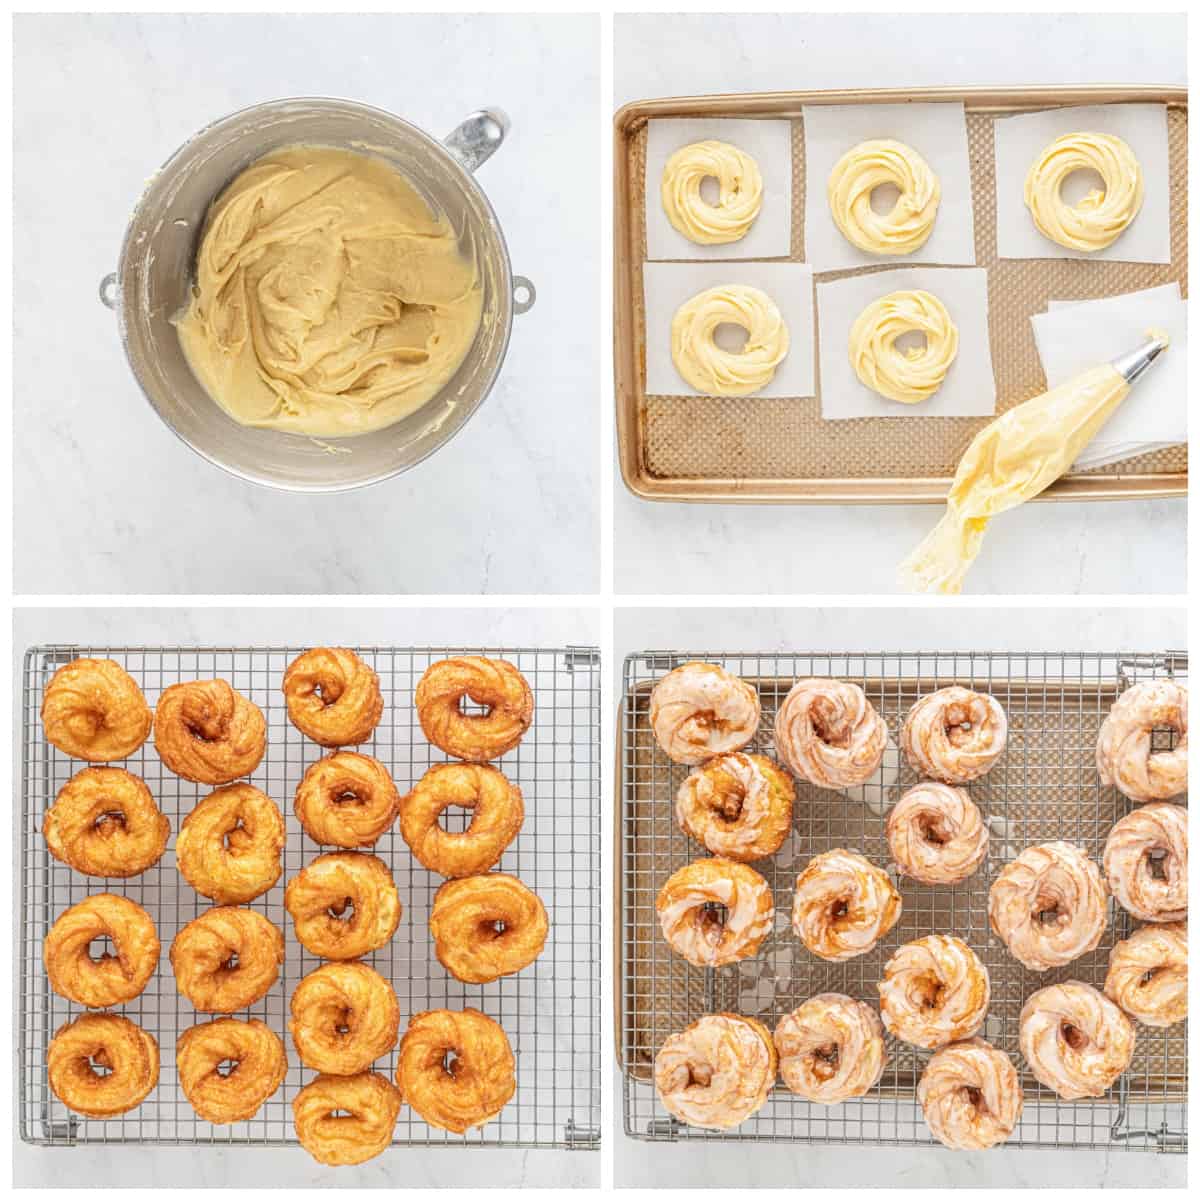 how to make French crullers step by step photo instructions